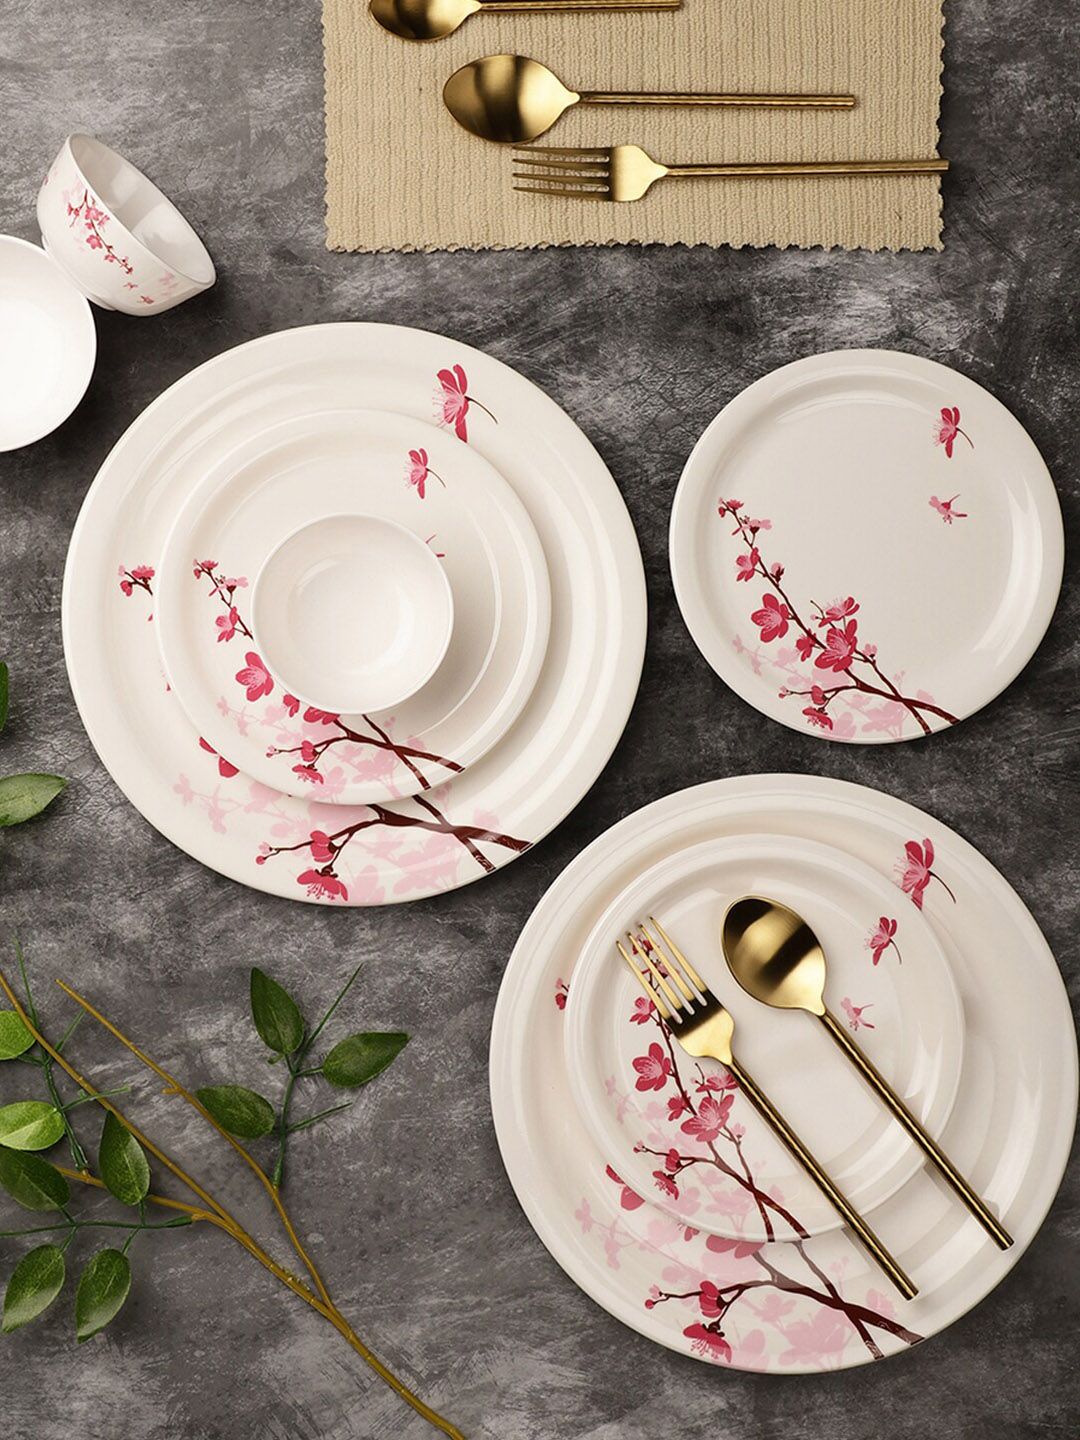 Servewell White & Red Pieces Floral Printed Melamine Glossy Dinner Set Price in India